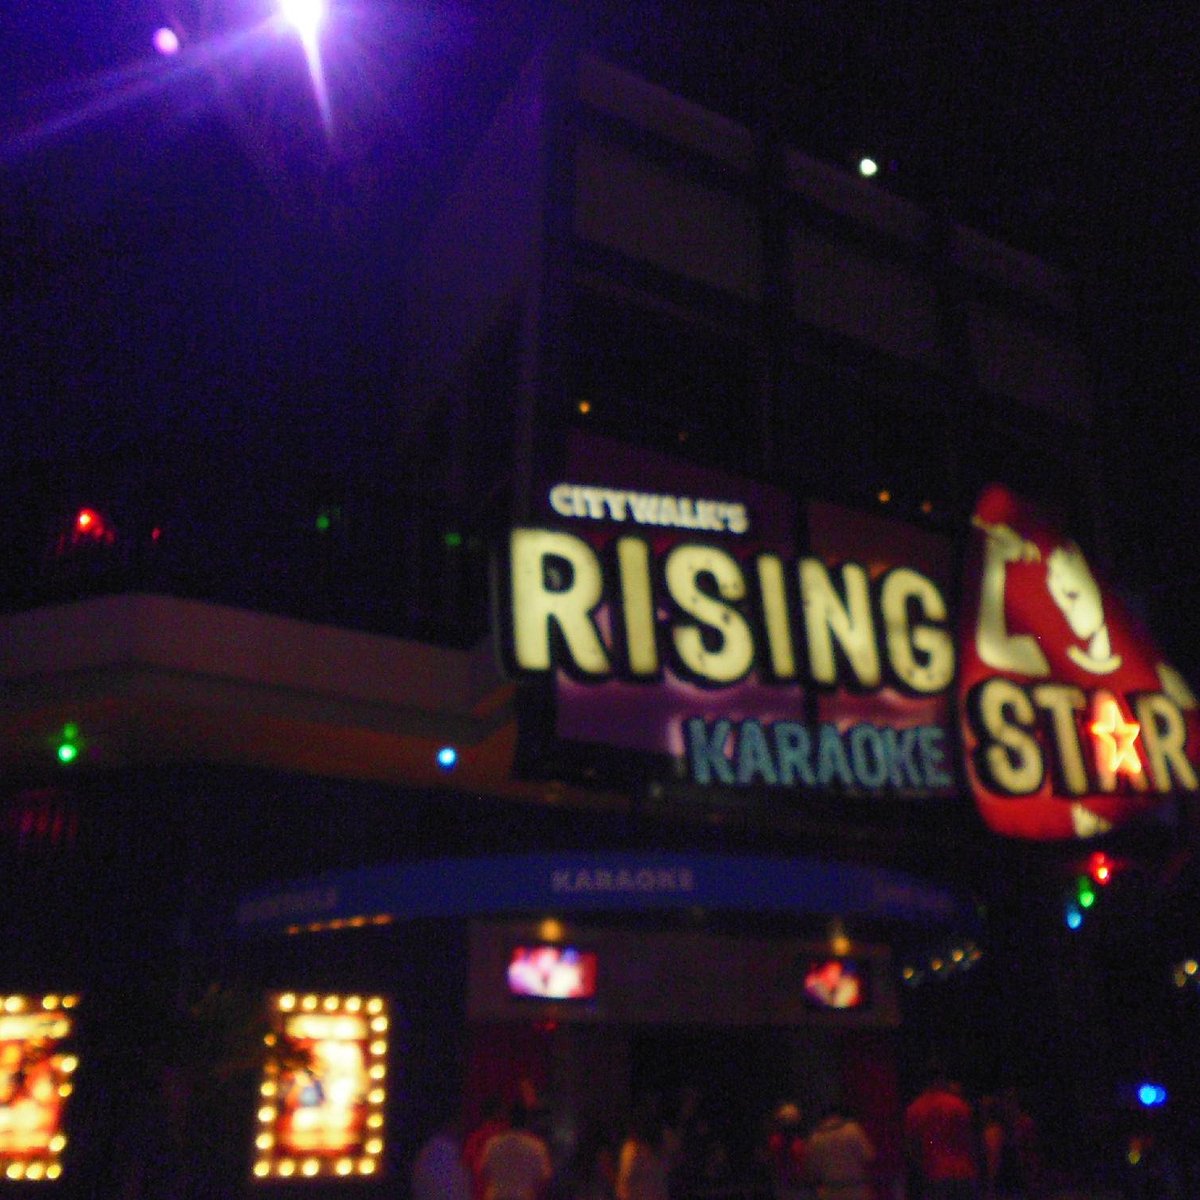 Universal CityWalk Rising Star is one of the very best things to